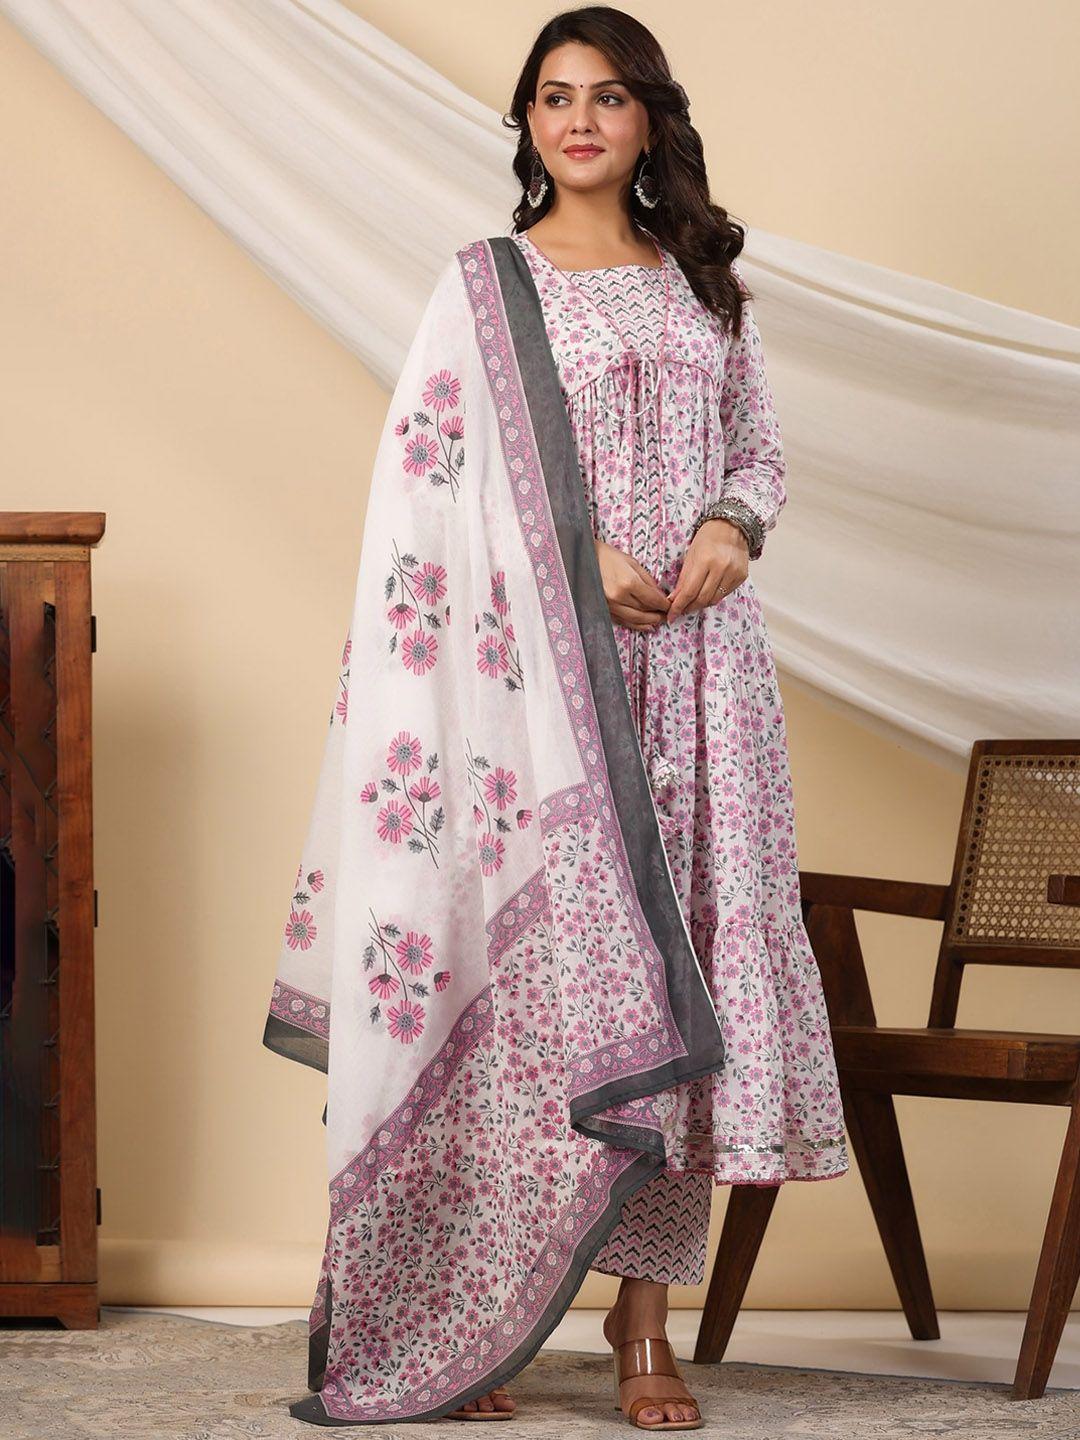 etnicawear-floral-printed-layered-pure-cotton-kurta-with-palazzos-&-dupatta